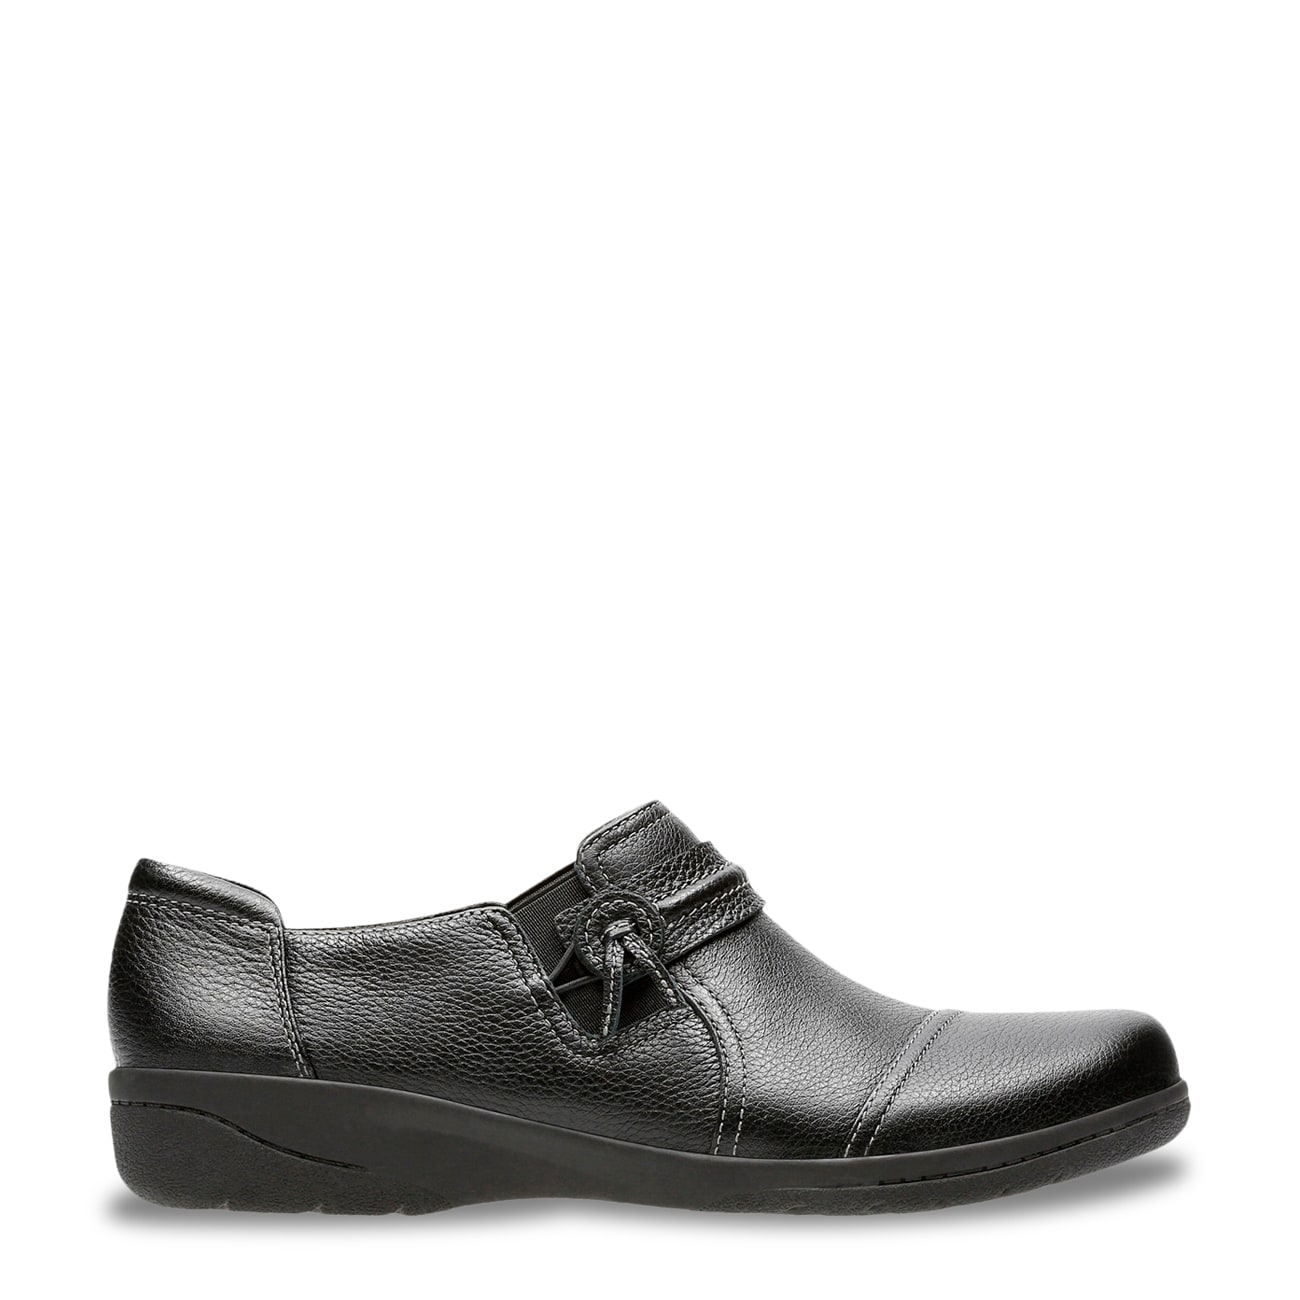 where to buy clarks shoes online in canada